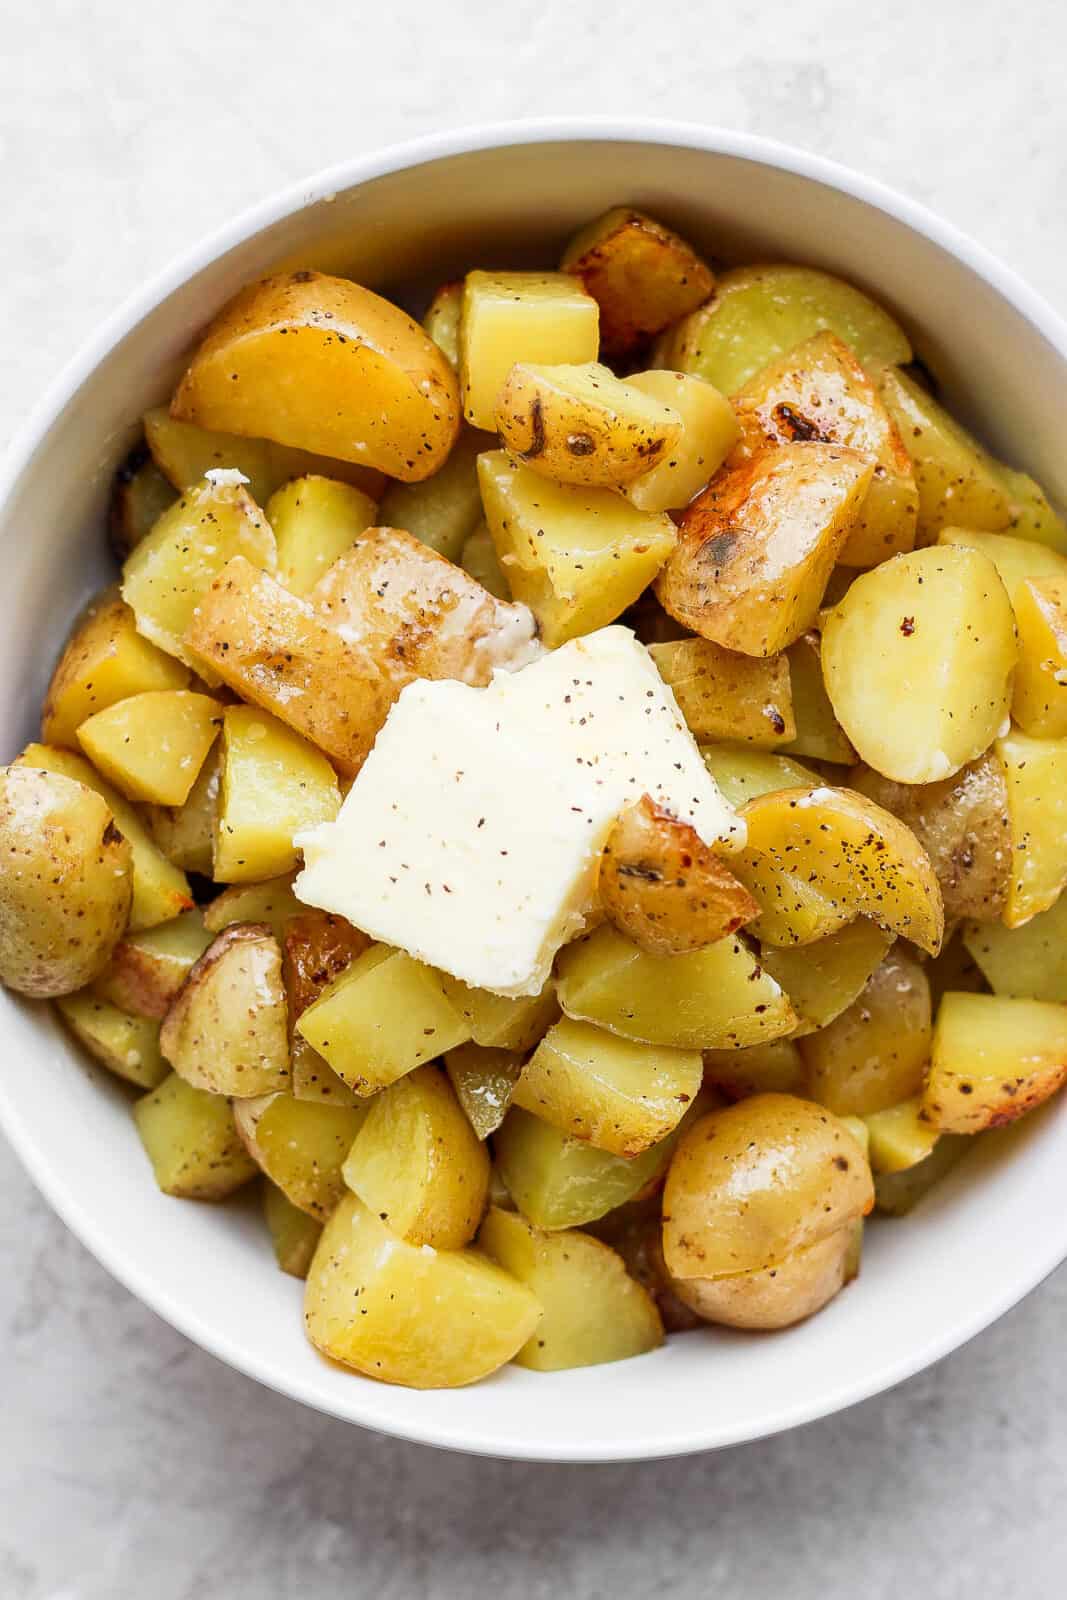 Grilled potatoes in a bowl with extra butter, salt, and pepper.